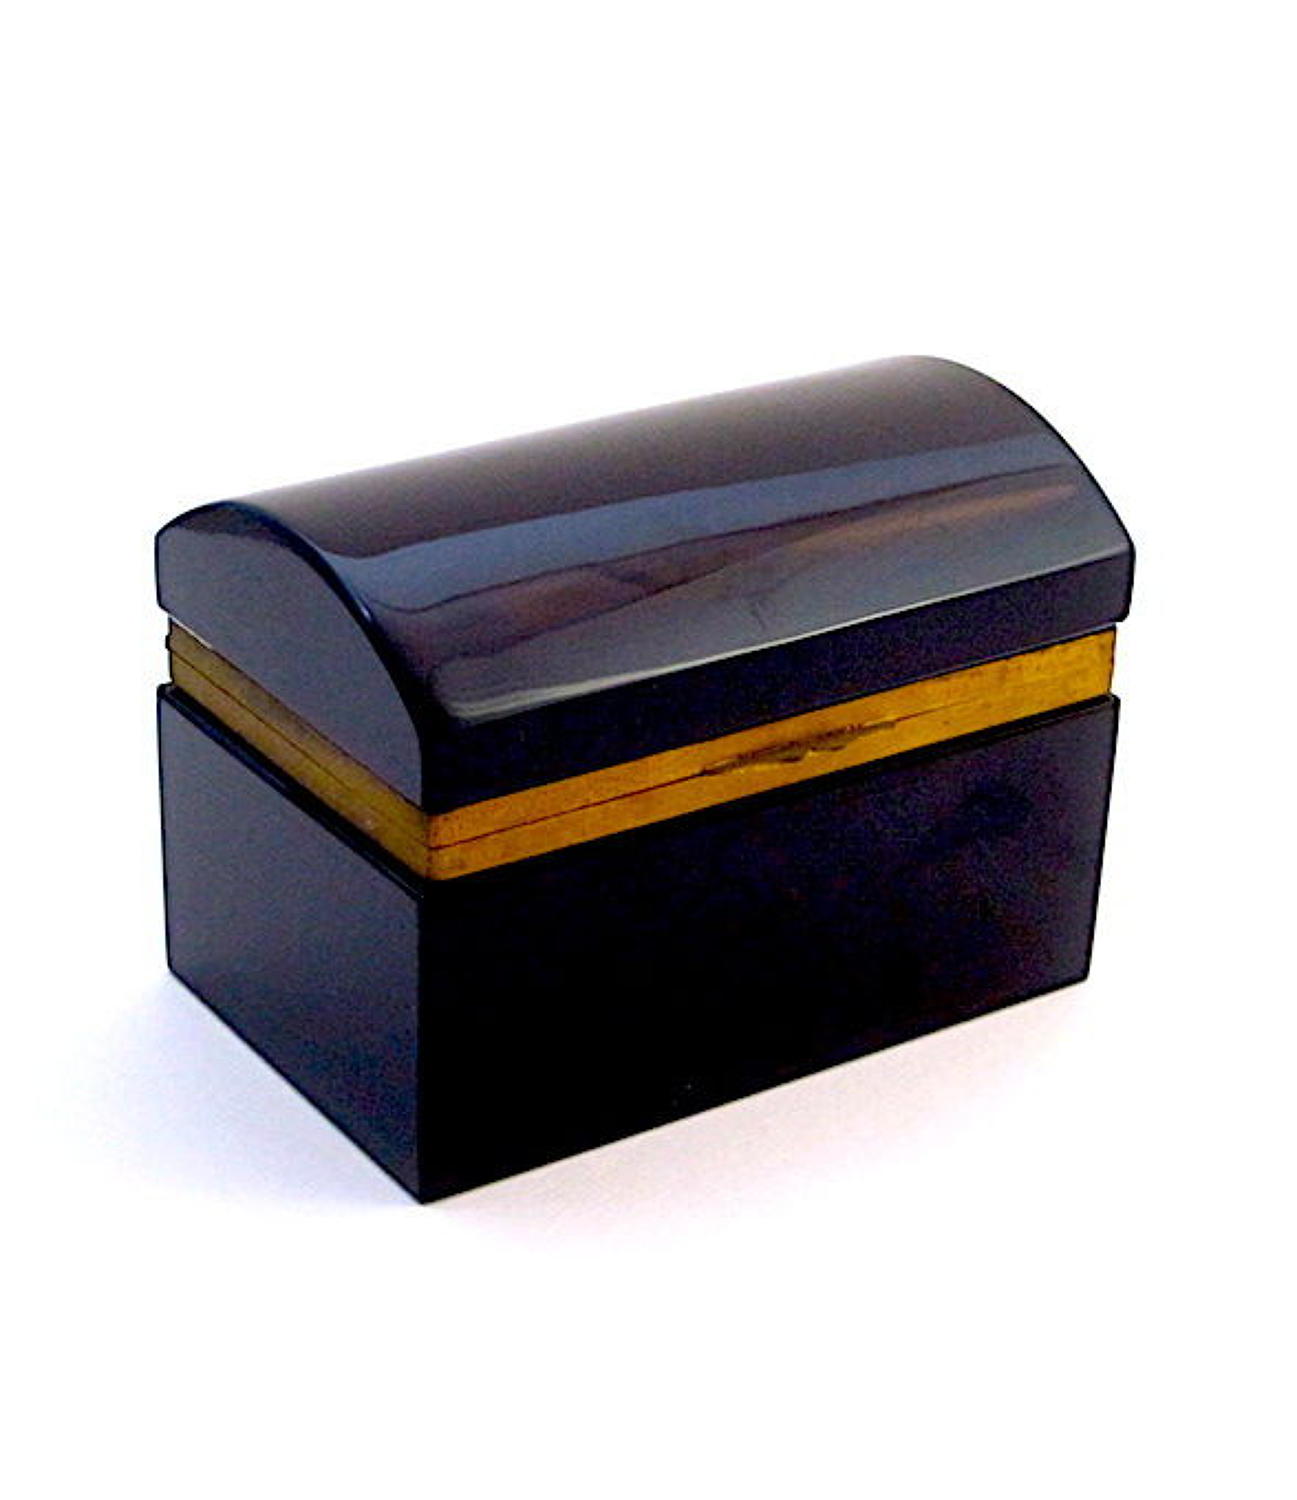 Rare Antique Black Opaline Glass Casket Box with Domed Lid